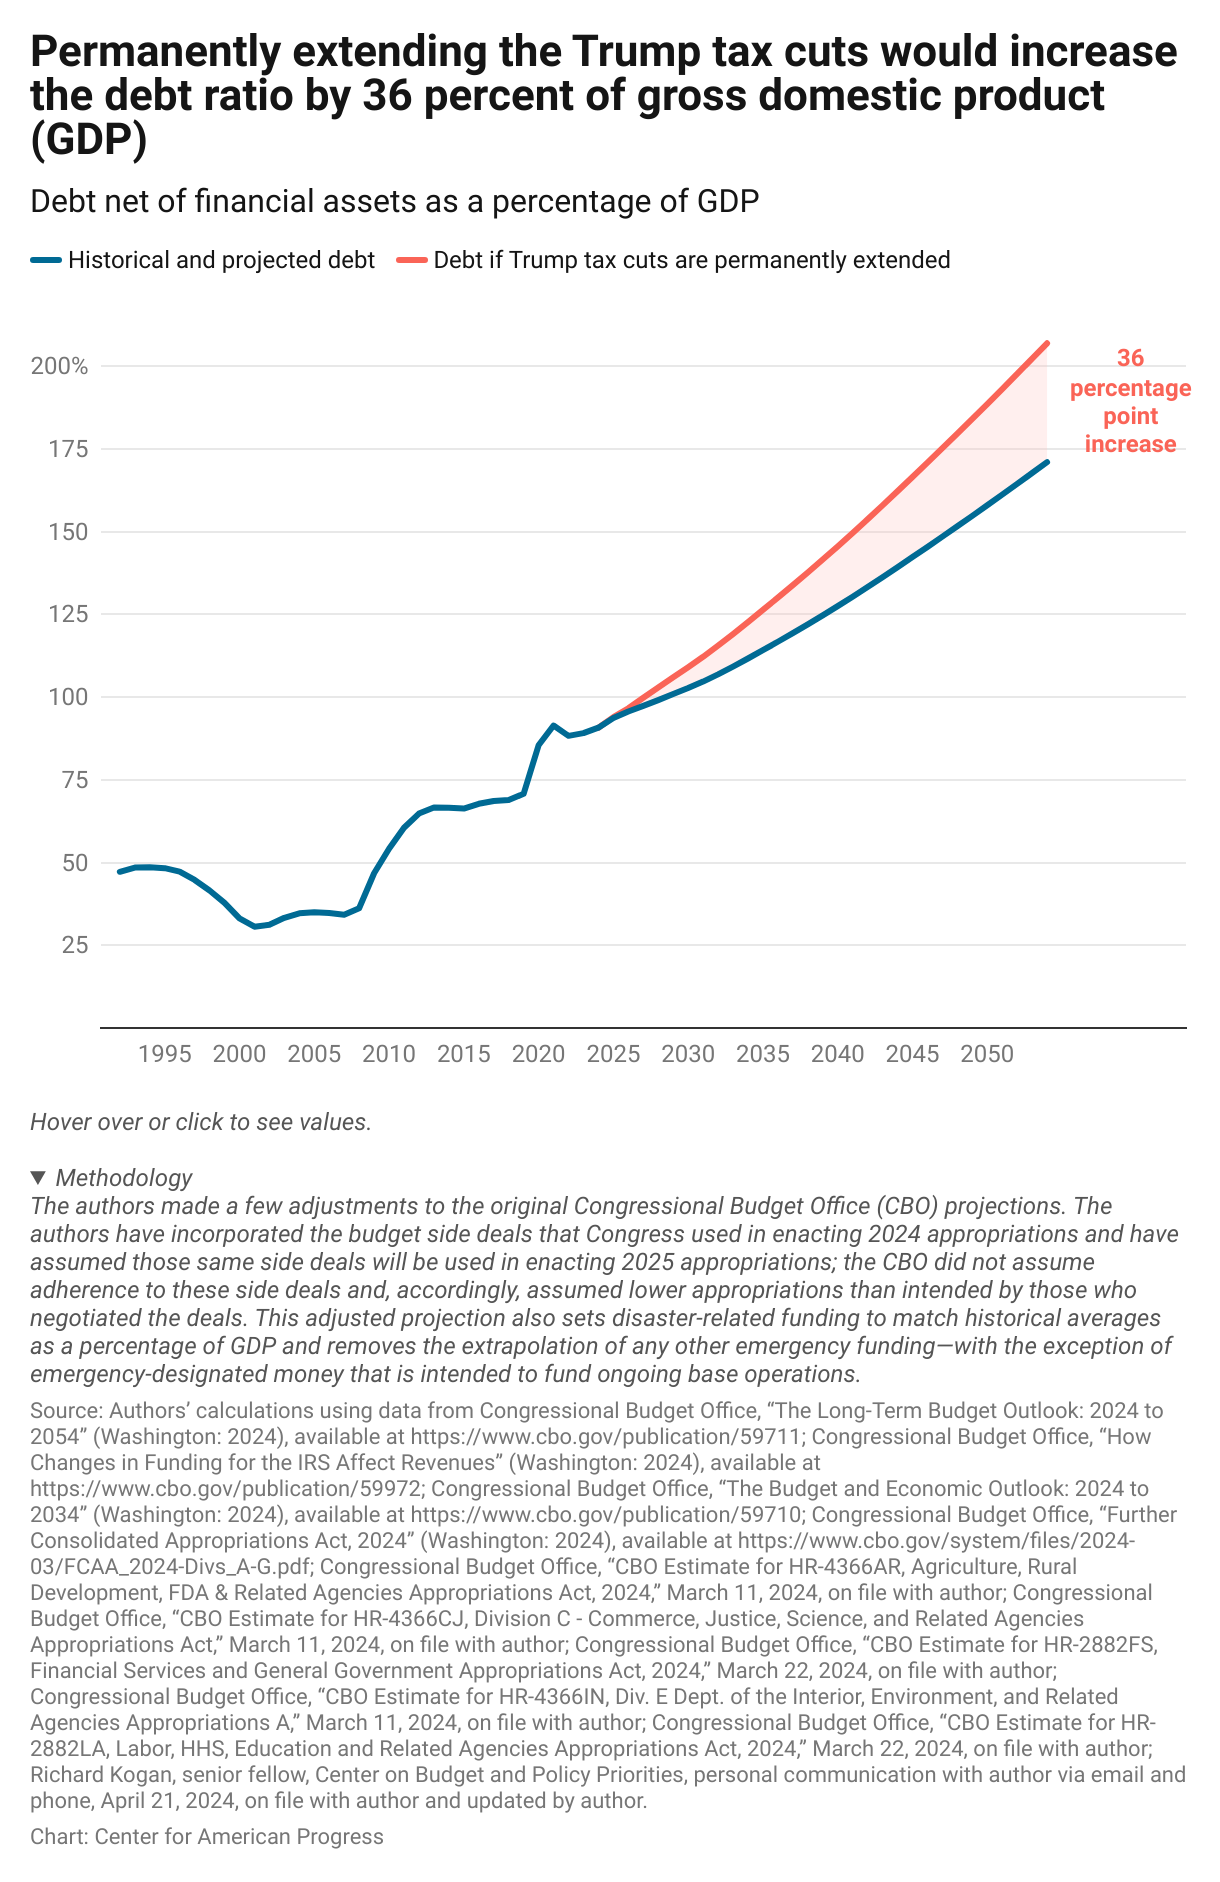 Line graph showing debt net of financial assets under the Congressional Budget Office's 2024 long-term budget outlook as well as a line showing debt if the Trump tax cuts are permanently extended. Doing so would would push debt above 200 percent of the gross domestic product by 2054.